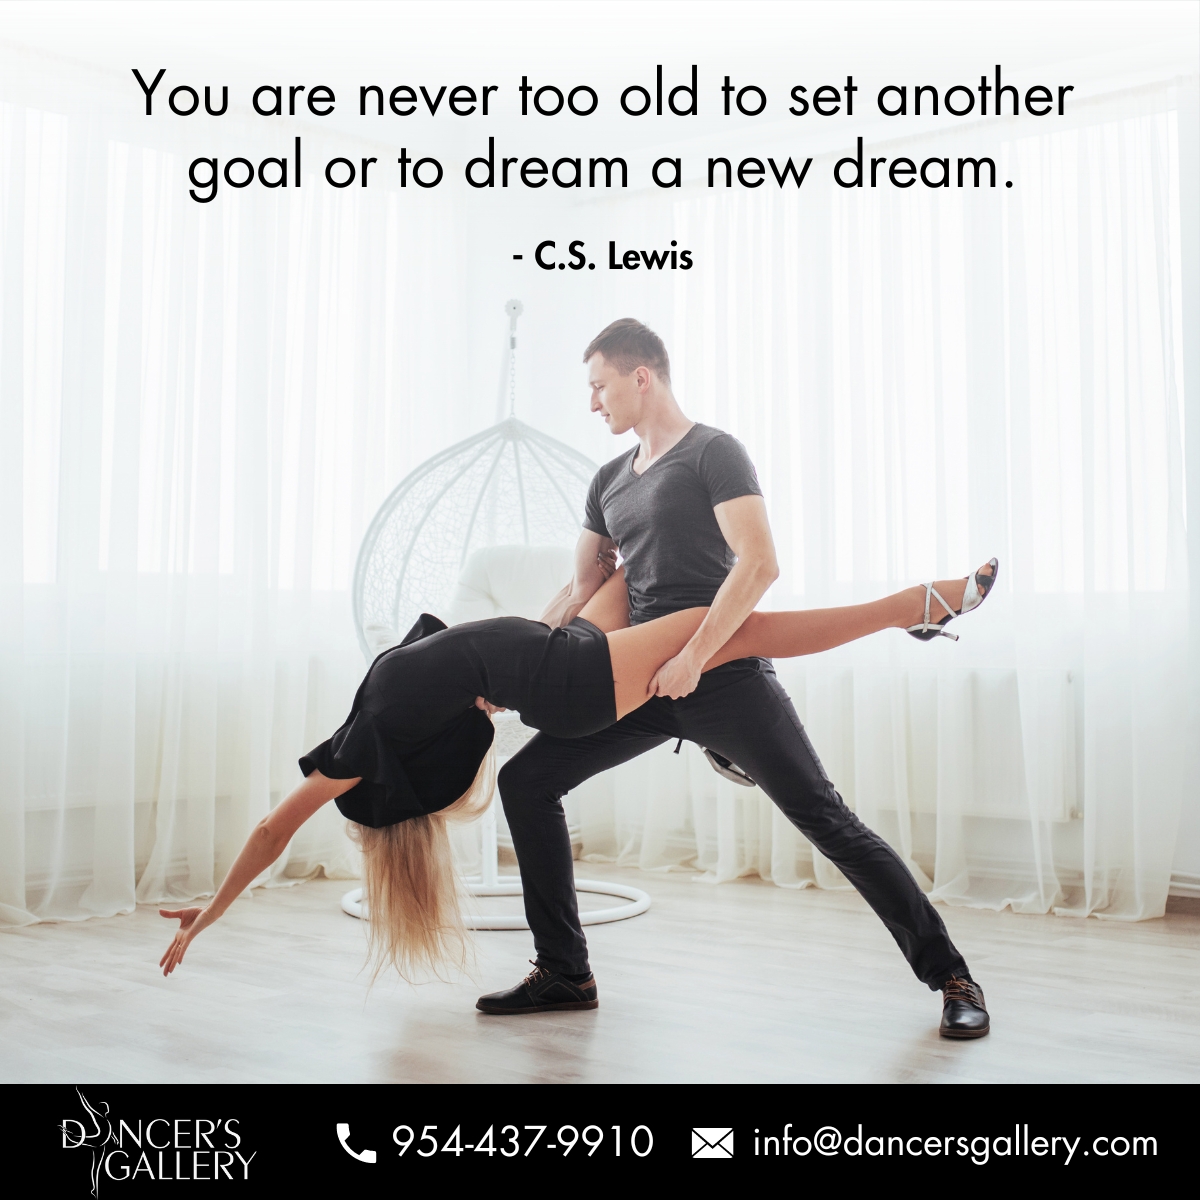 “You are never too old to set another goal or to dream a new dream.” - C.S. Lewis

#quoteoftheday #dancestudiomiami #danceclasses #dancelover #dancelove #dancegoals #dancelife #lovefordance #miamidanceclasses #coopercitydancestudio #dancestudiocoopercity #davieflorida